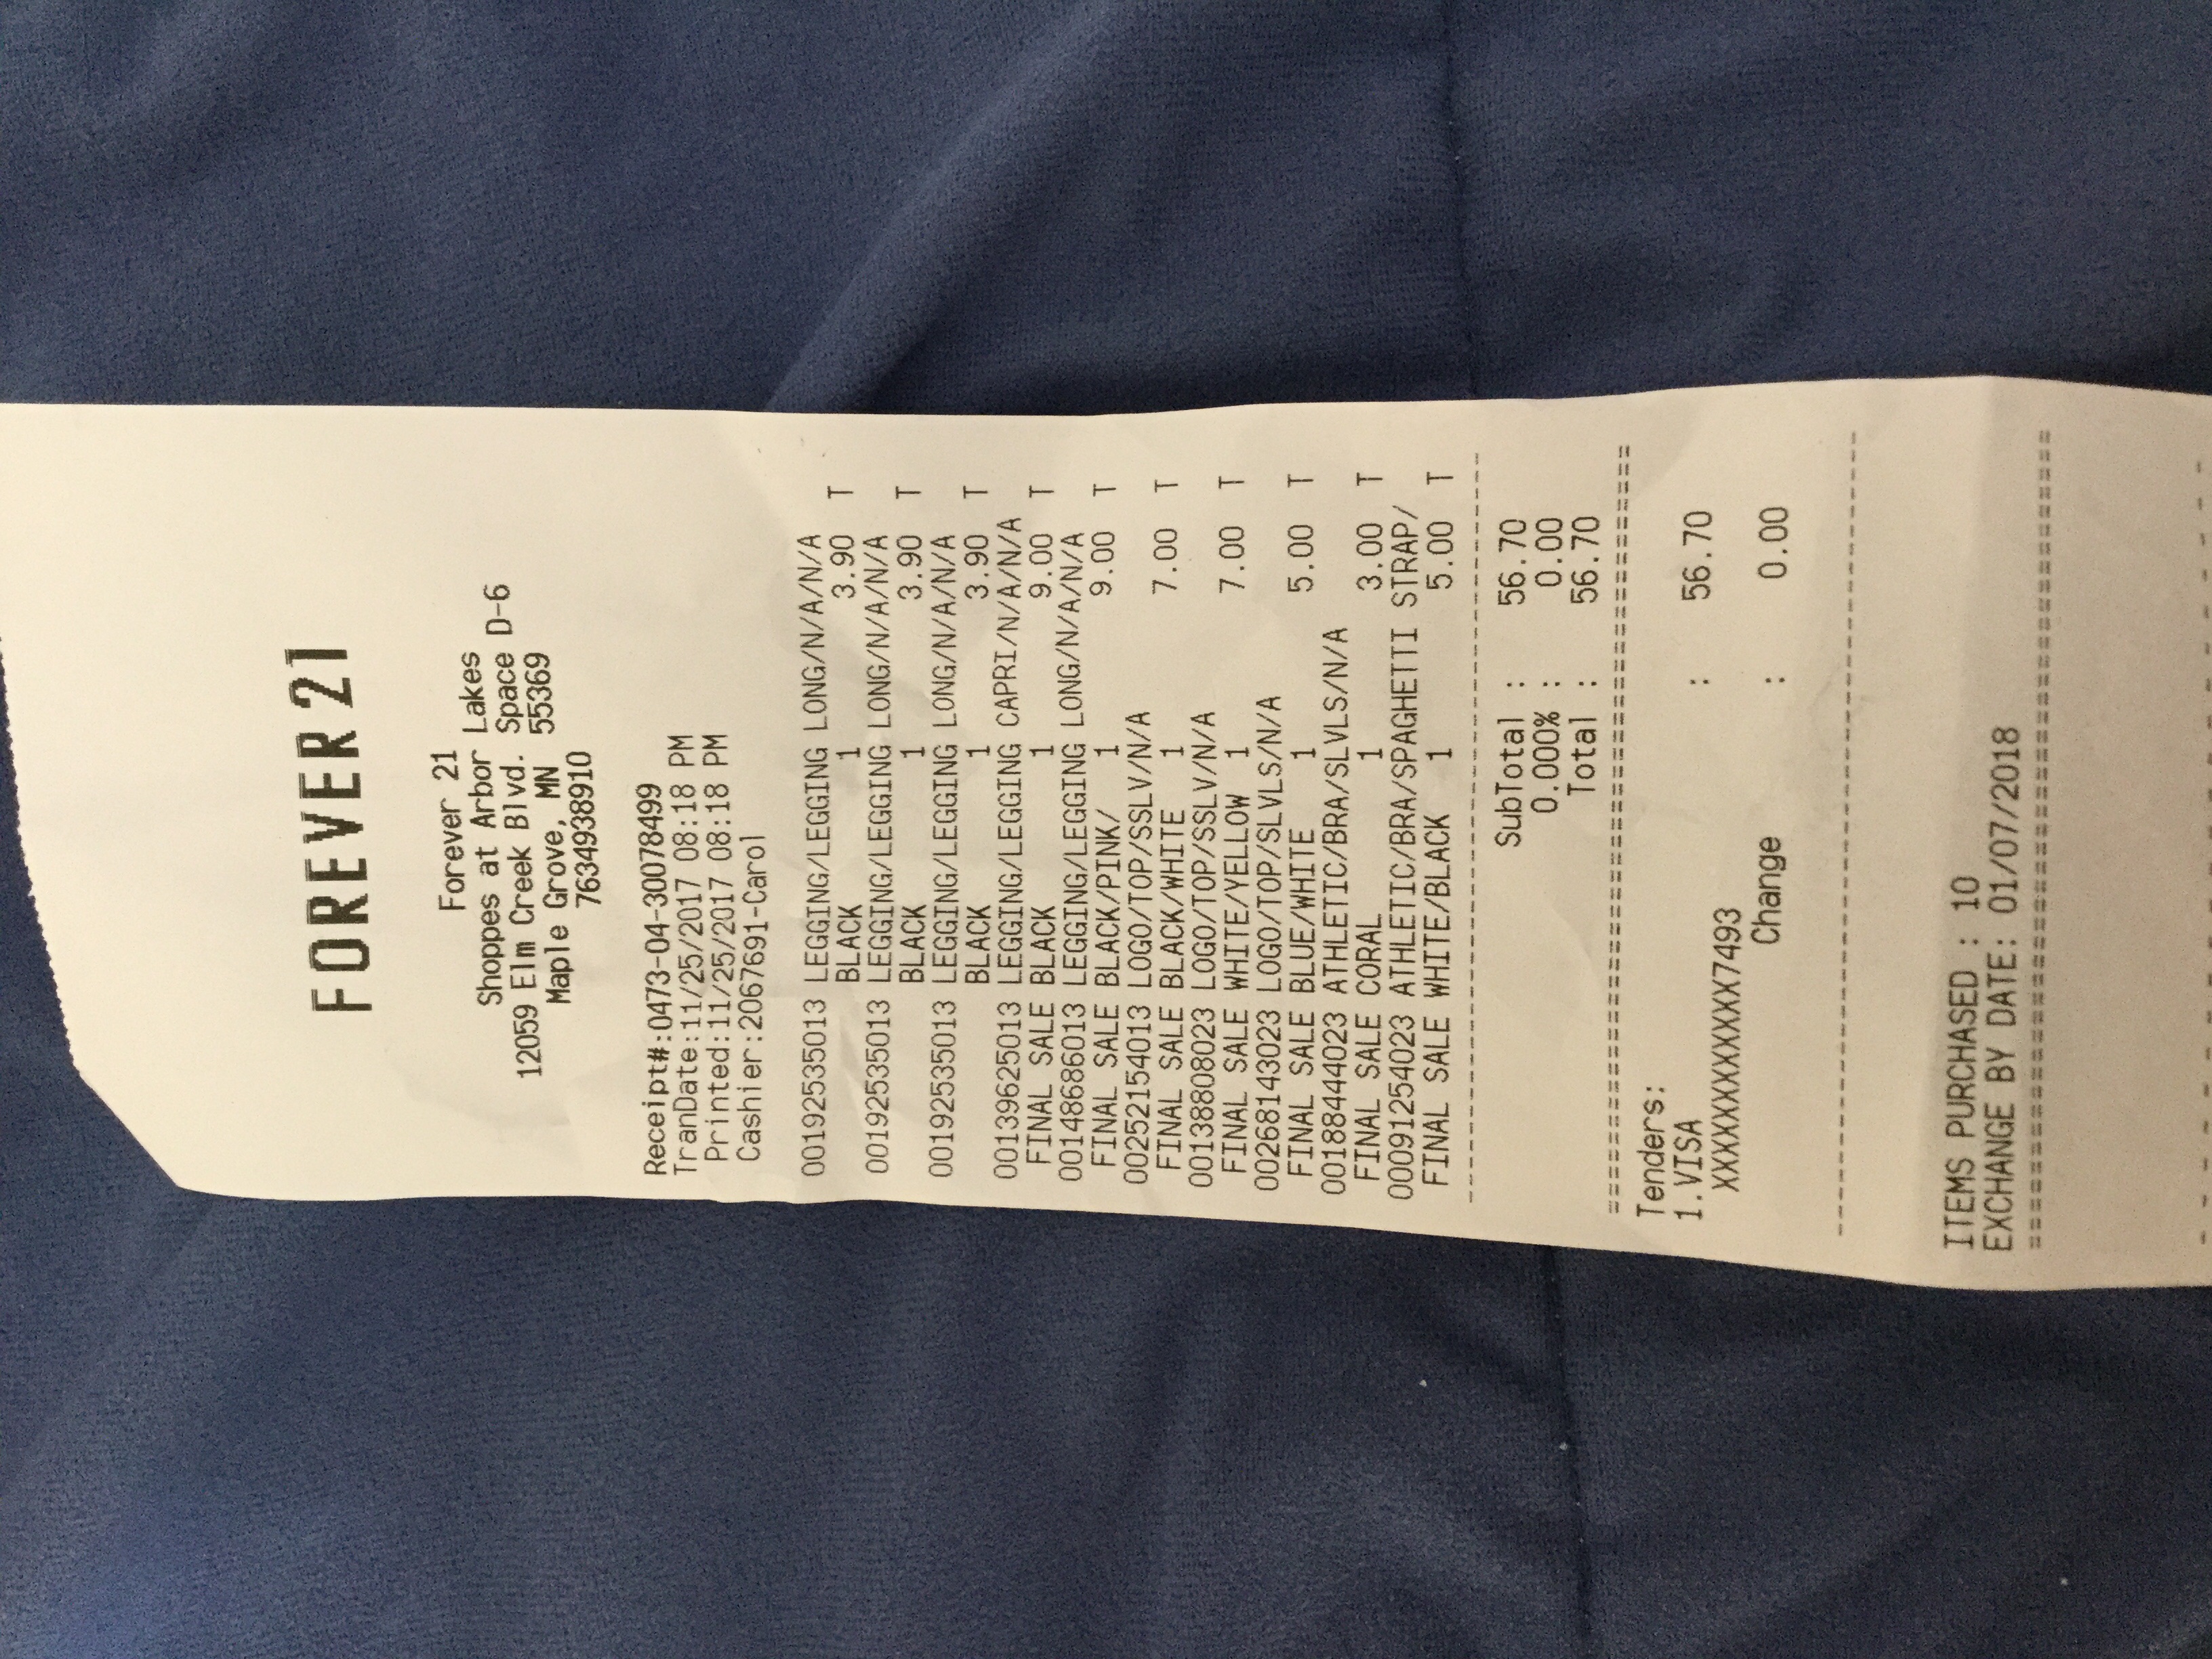 Forever 21 Mens Pants Size Chart